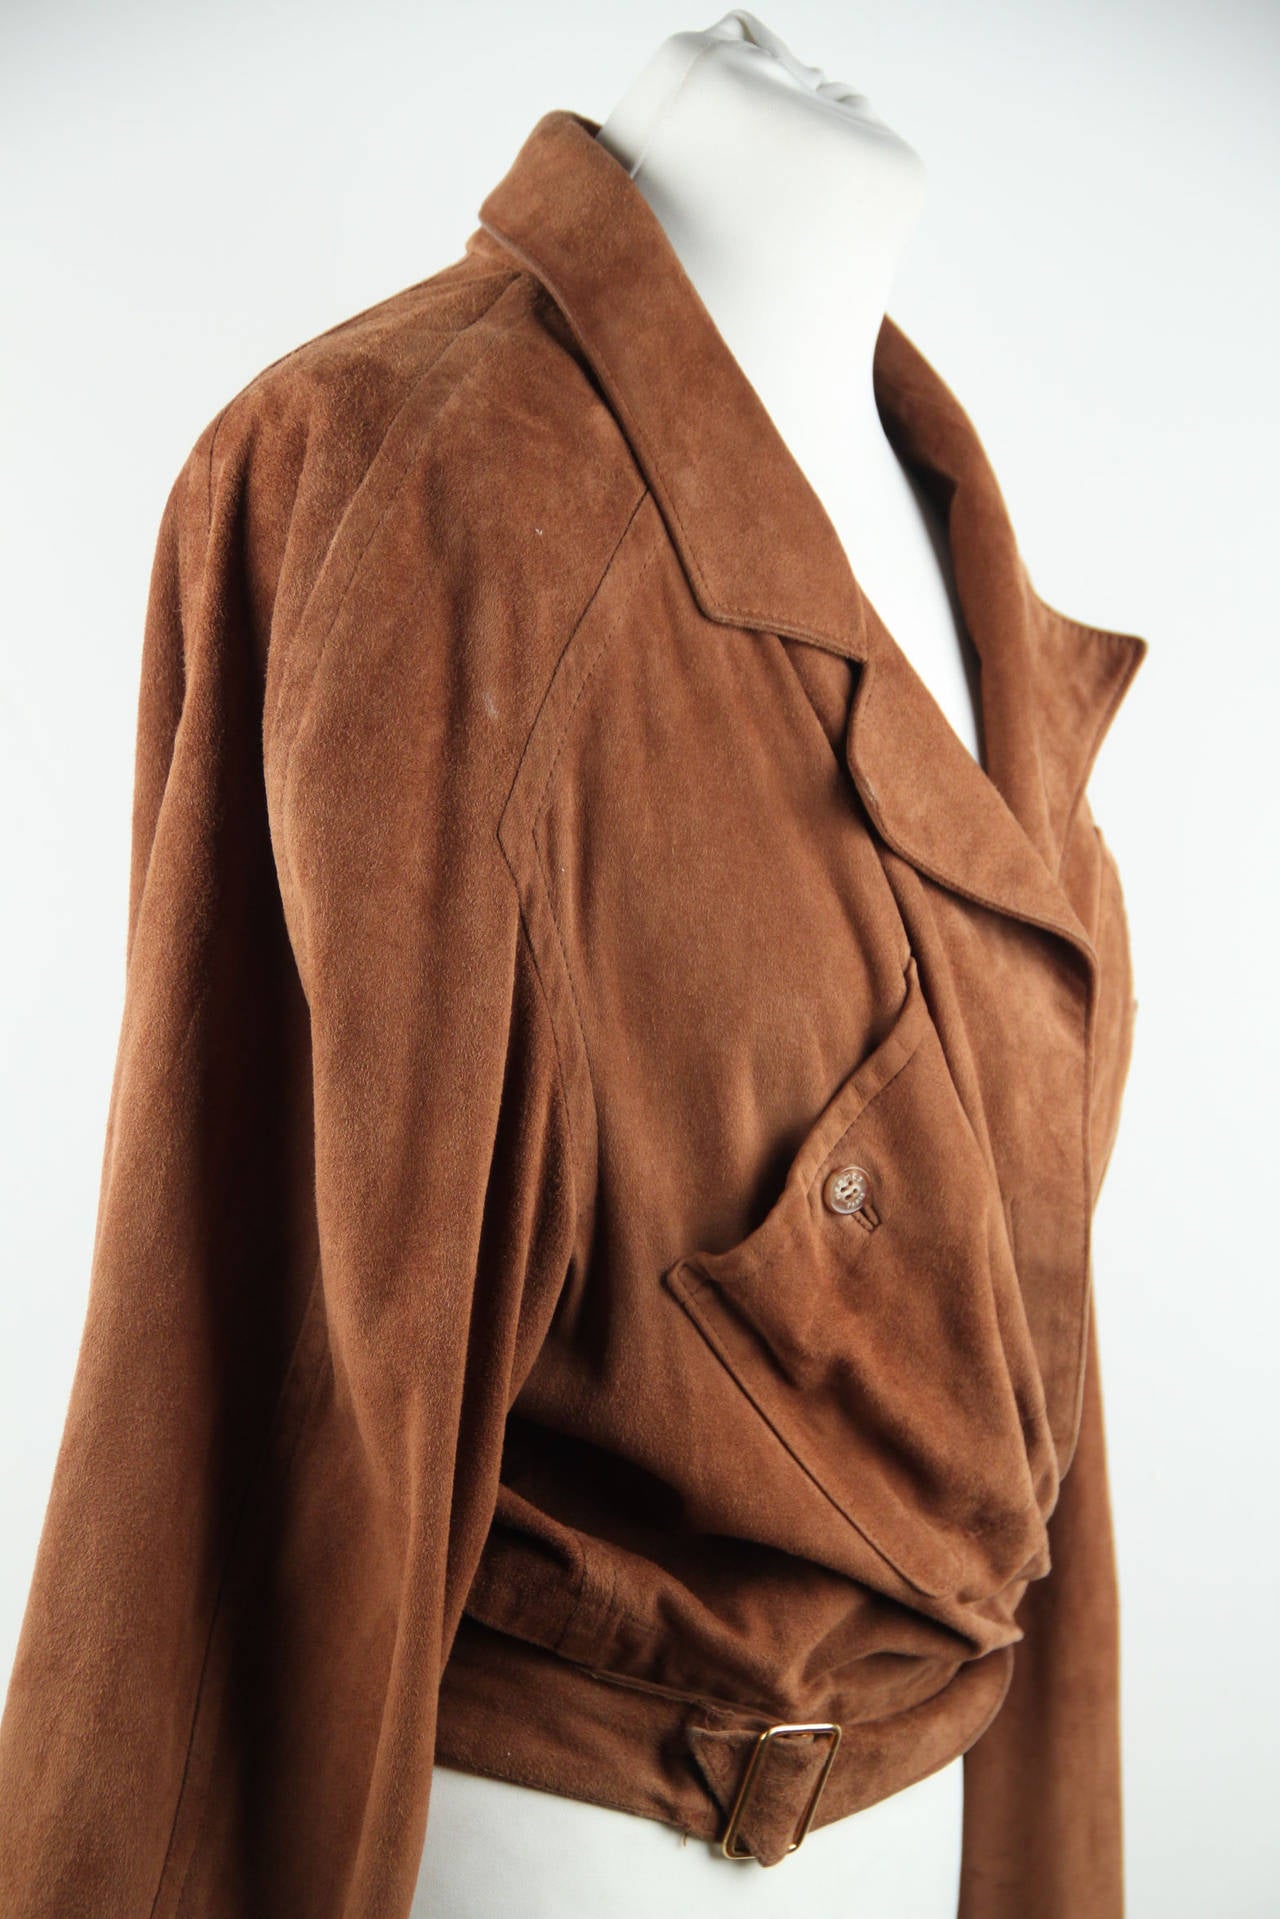 HERMES PARIS Vintage Tan Suede Lambskin WRAP JACKET Cropped Lenght Sz 36 FR In Excellent Condition In Rome, Rome